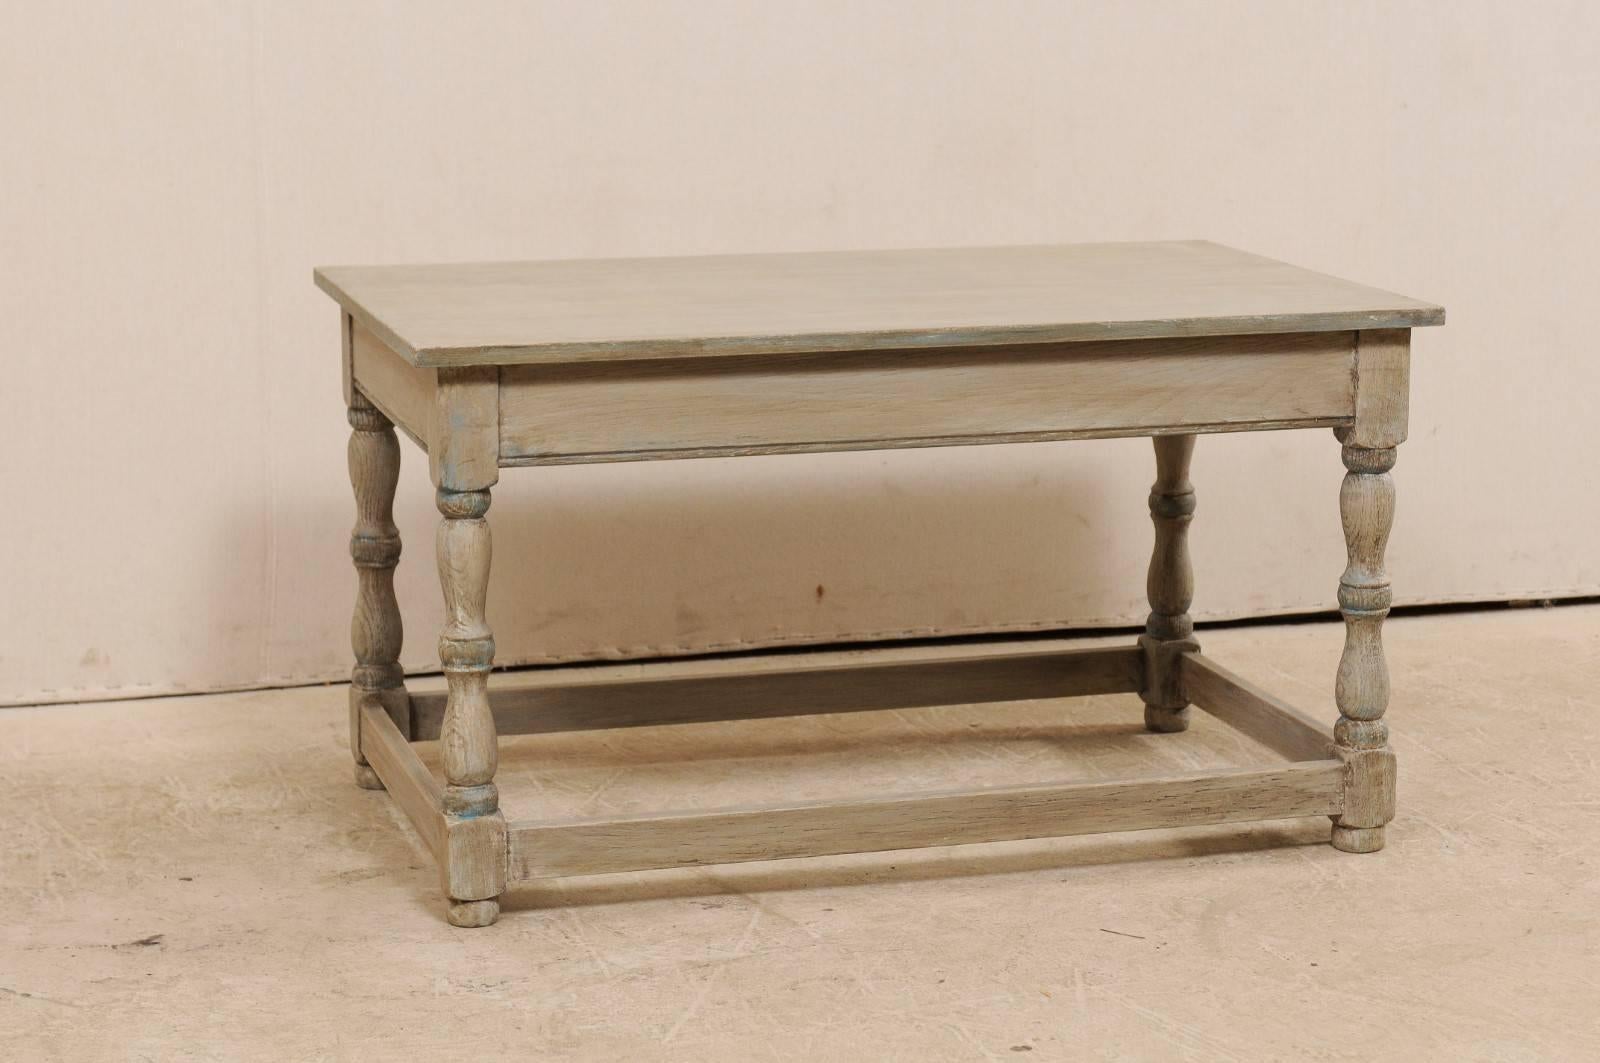 A French grey-toned wood coffee table from the mid-20th century. This vintage French coffee table of wood features a rectangular-shaped top over four nicely turned legs, each braced with a plain box stretcher between them. The skirt has clean,